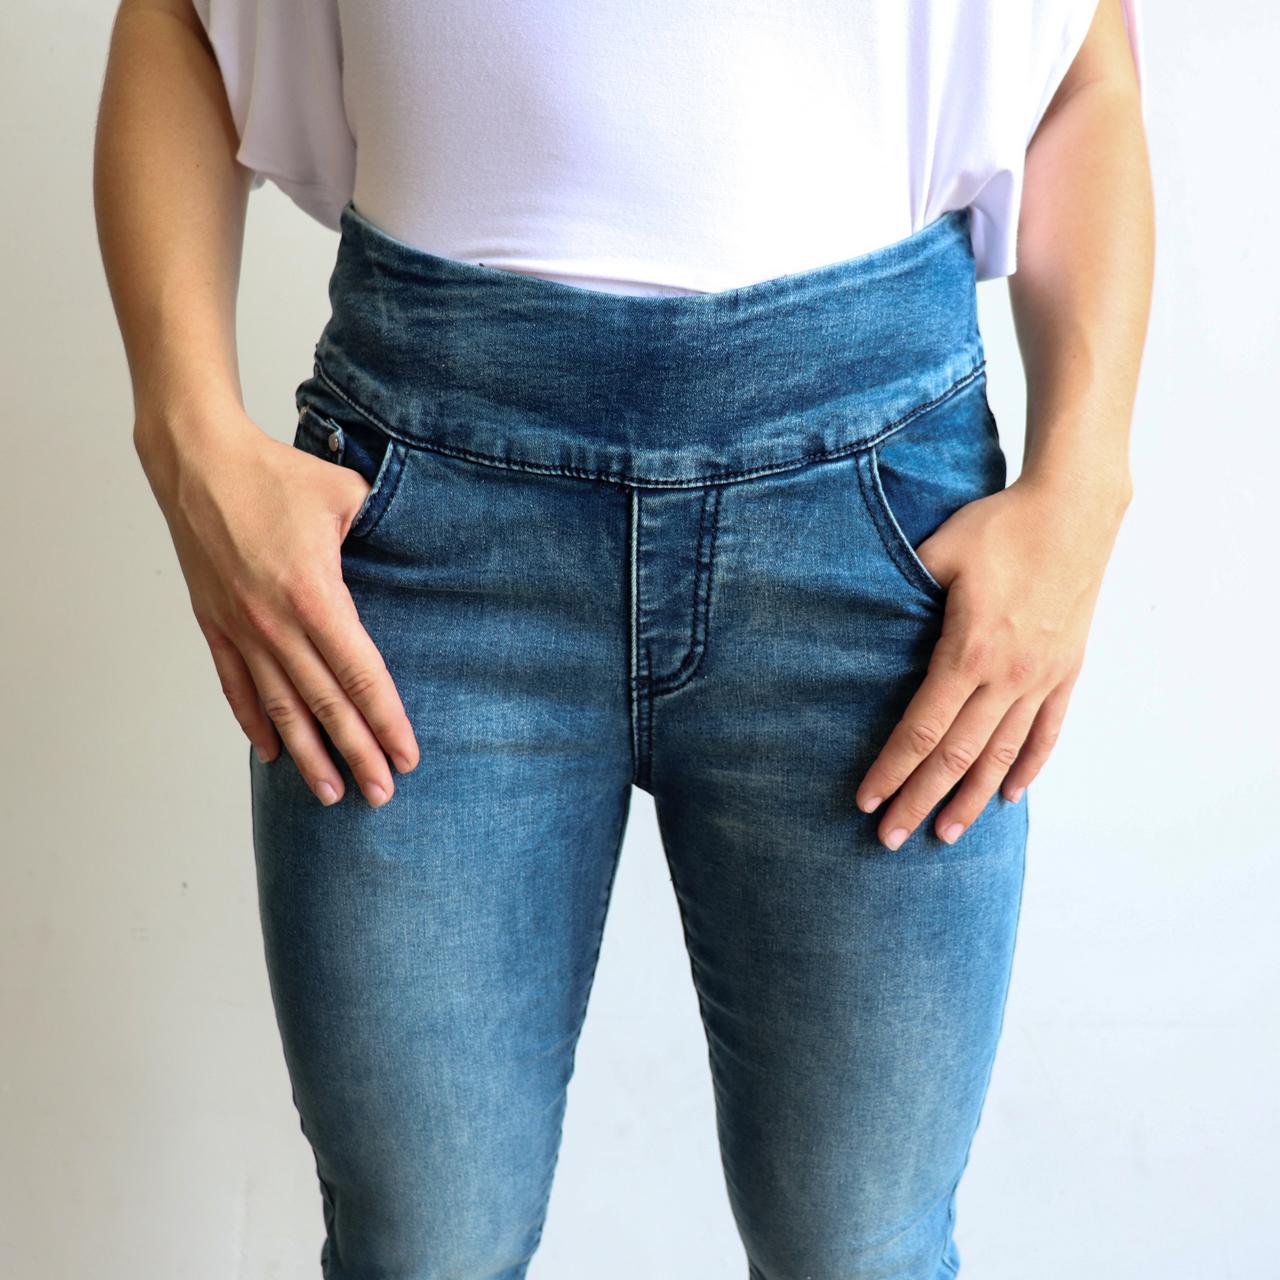 Shaper Denim Jeans - mid-rise stretch pull-on jegging in plus size ...